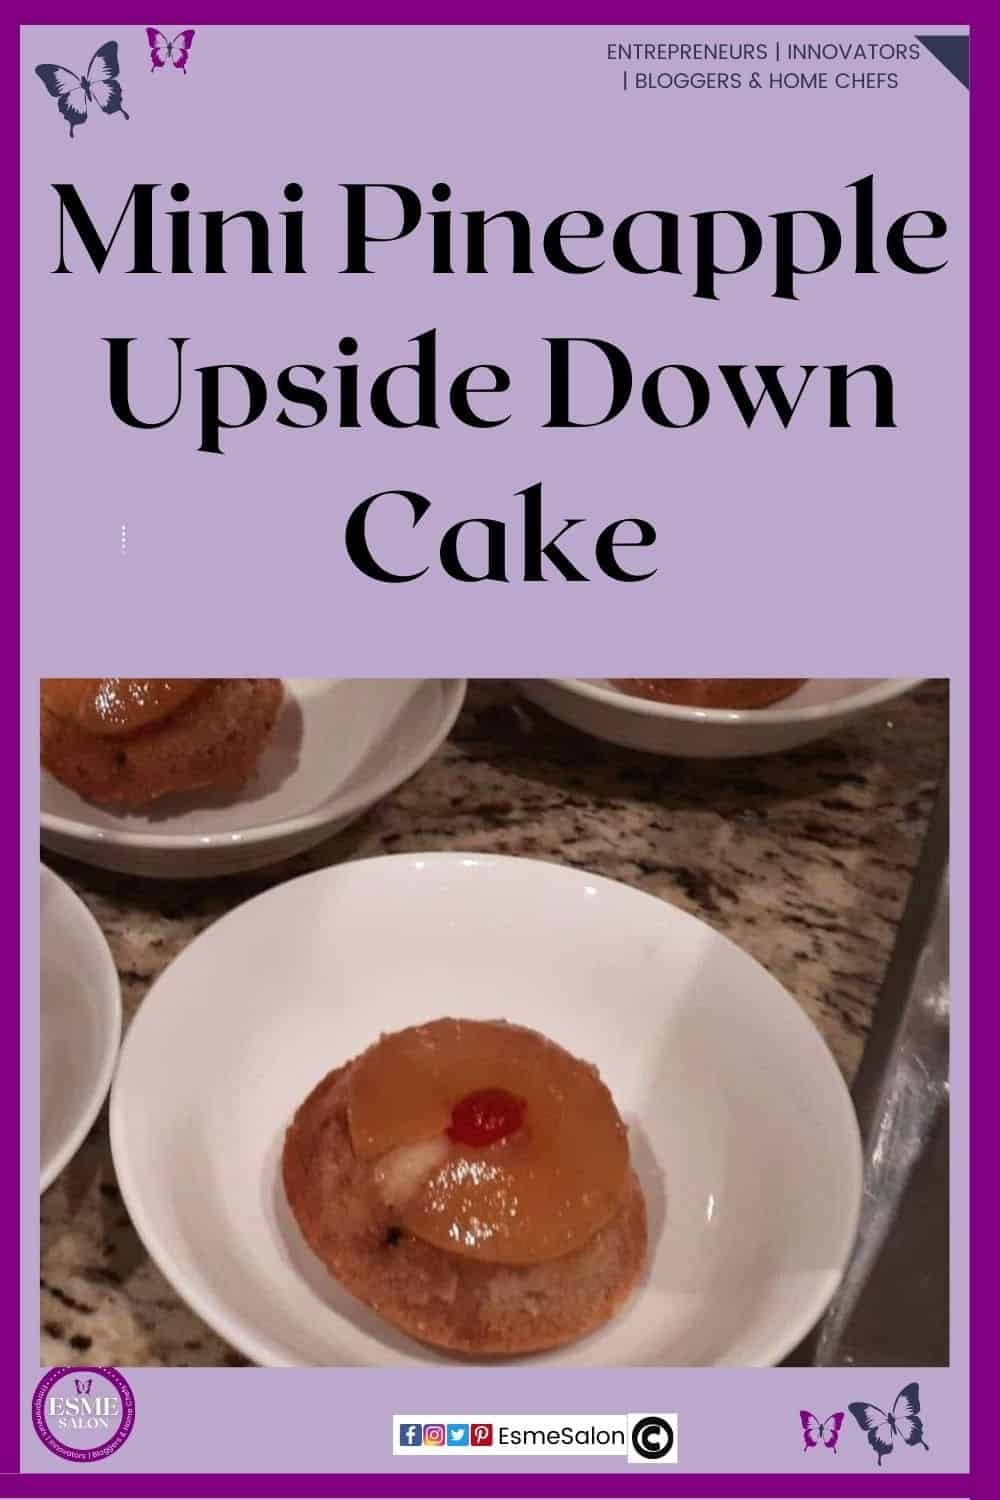 an image of 4 white dessert bowls with a Mini Pineapple Upside Down Cake with a pineapple ring and cherry on the top